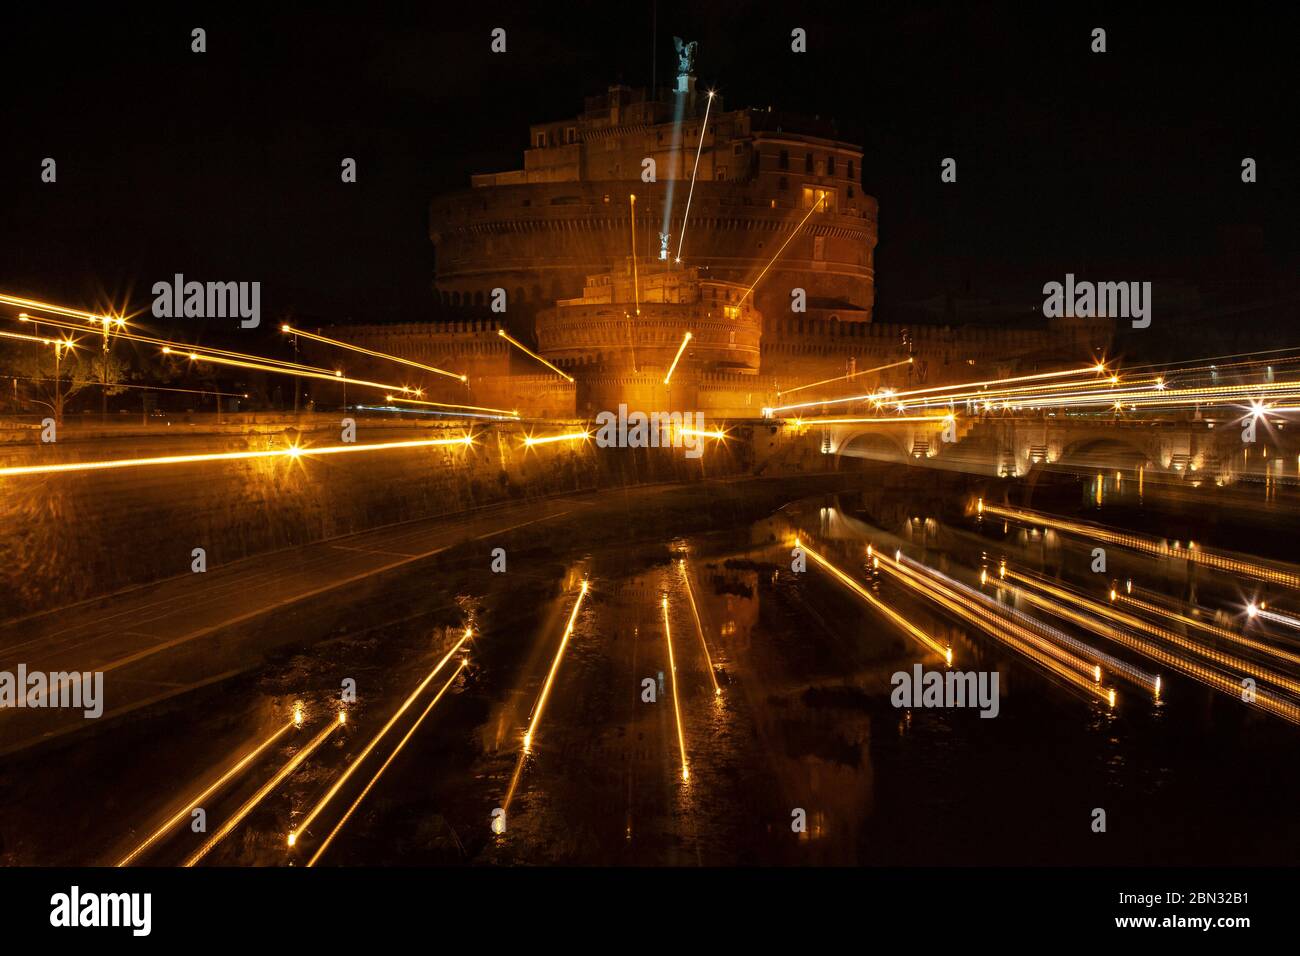 Zoomed nocturnal photograph of the Castel Sant'Angelo, Rome, with double image and zoomed light streaks Stock Photo